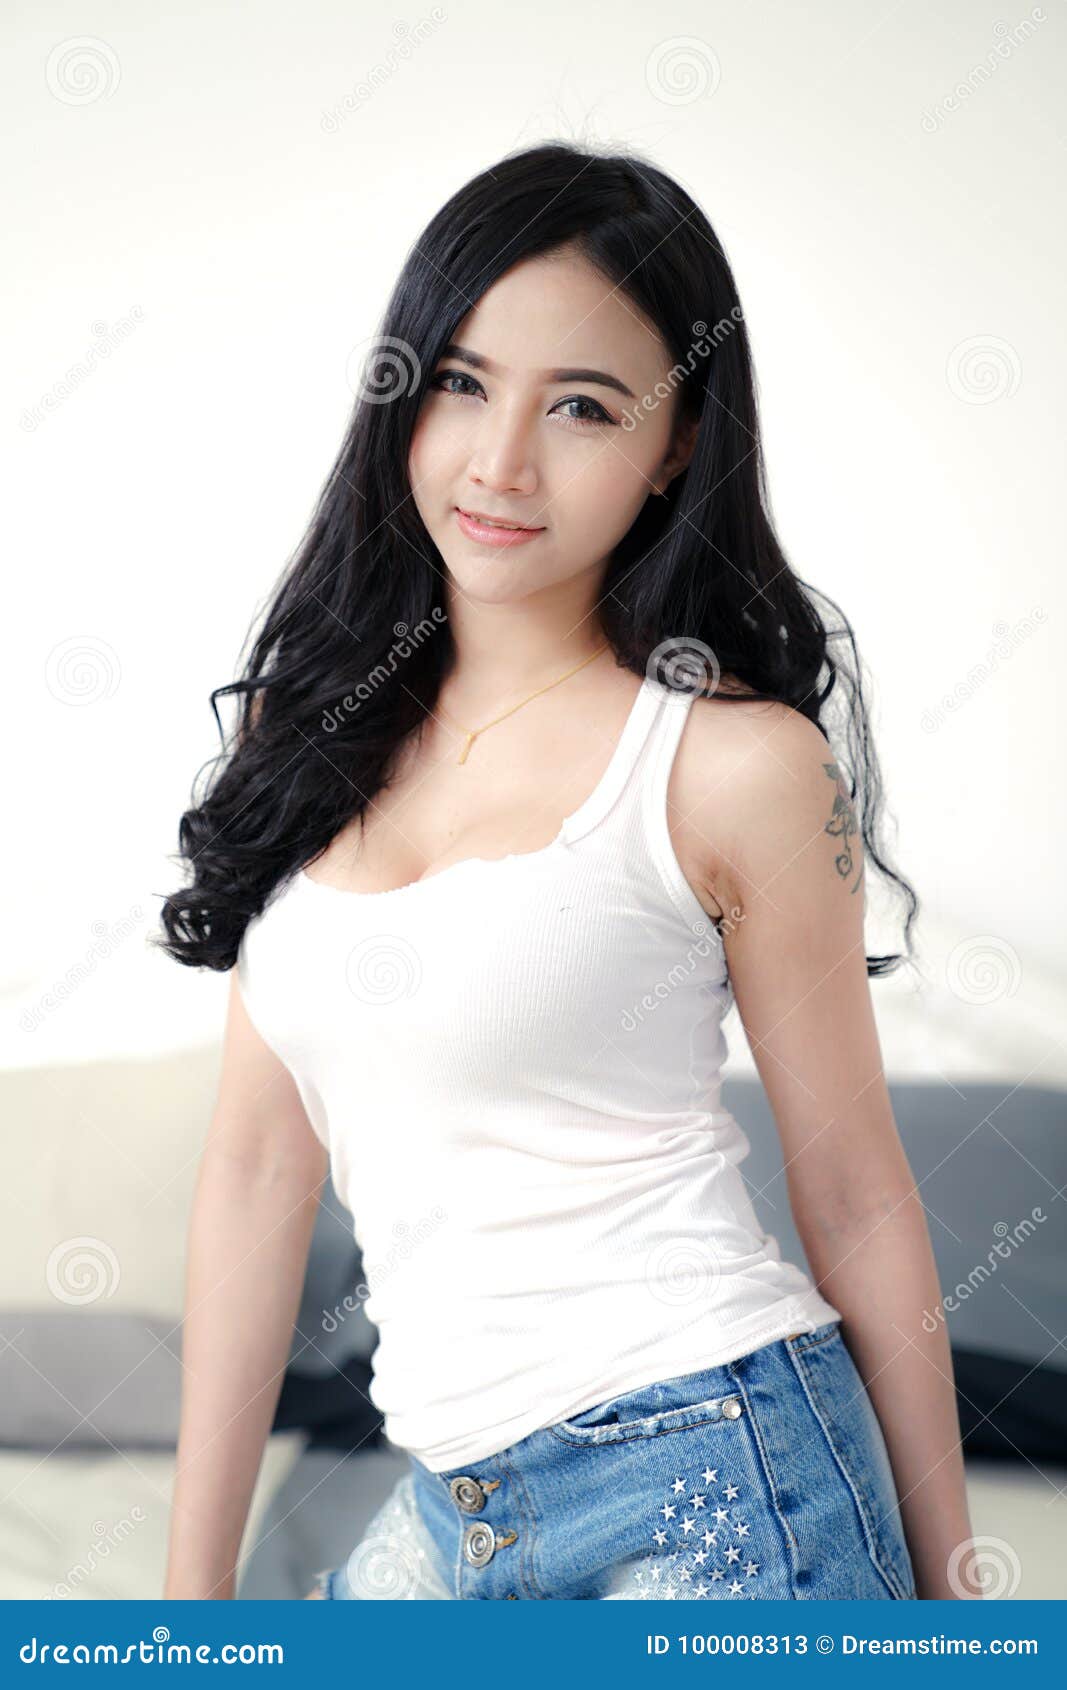 Asin Xxx Photo - Asian young lady stock image. Image of black, boobs - 100008313